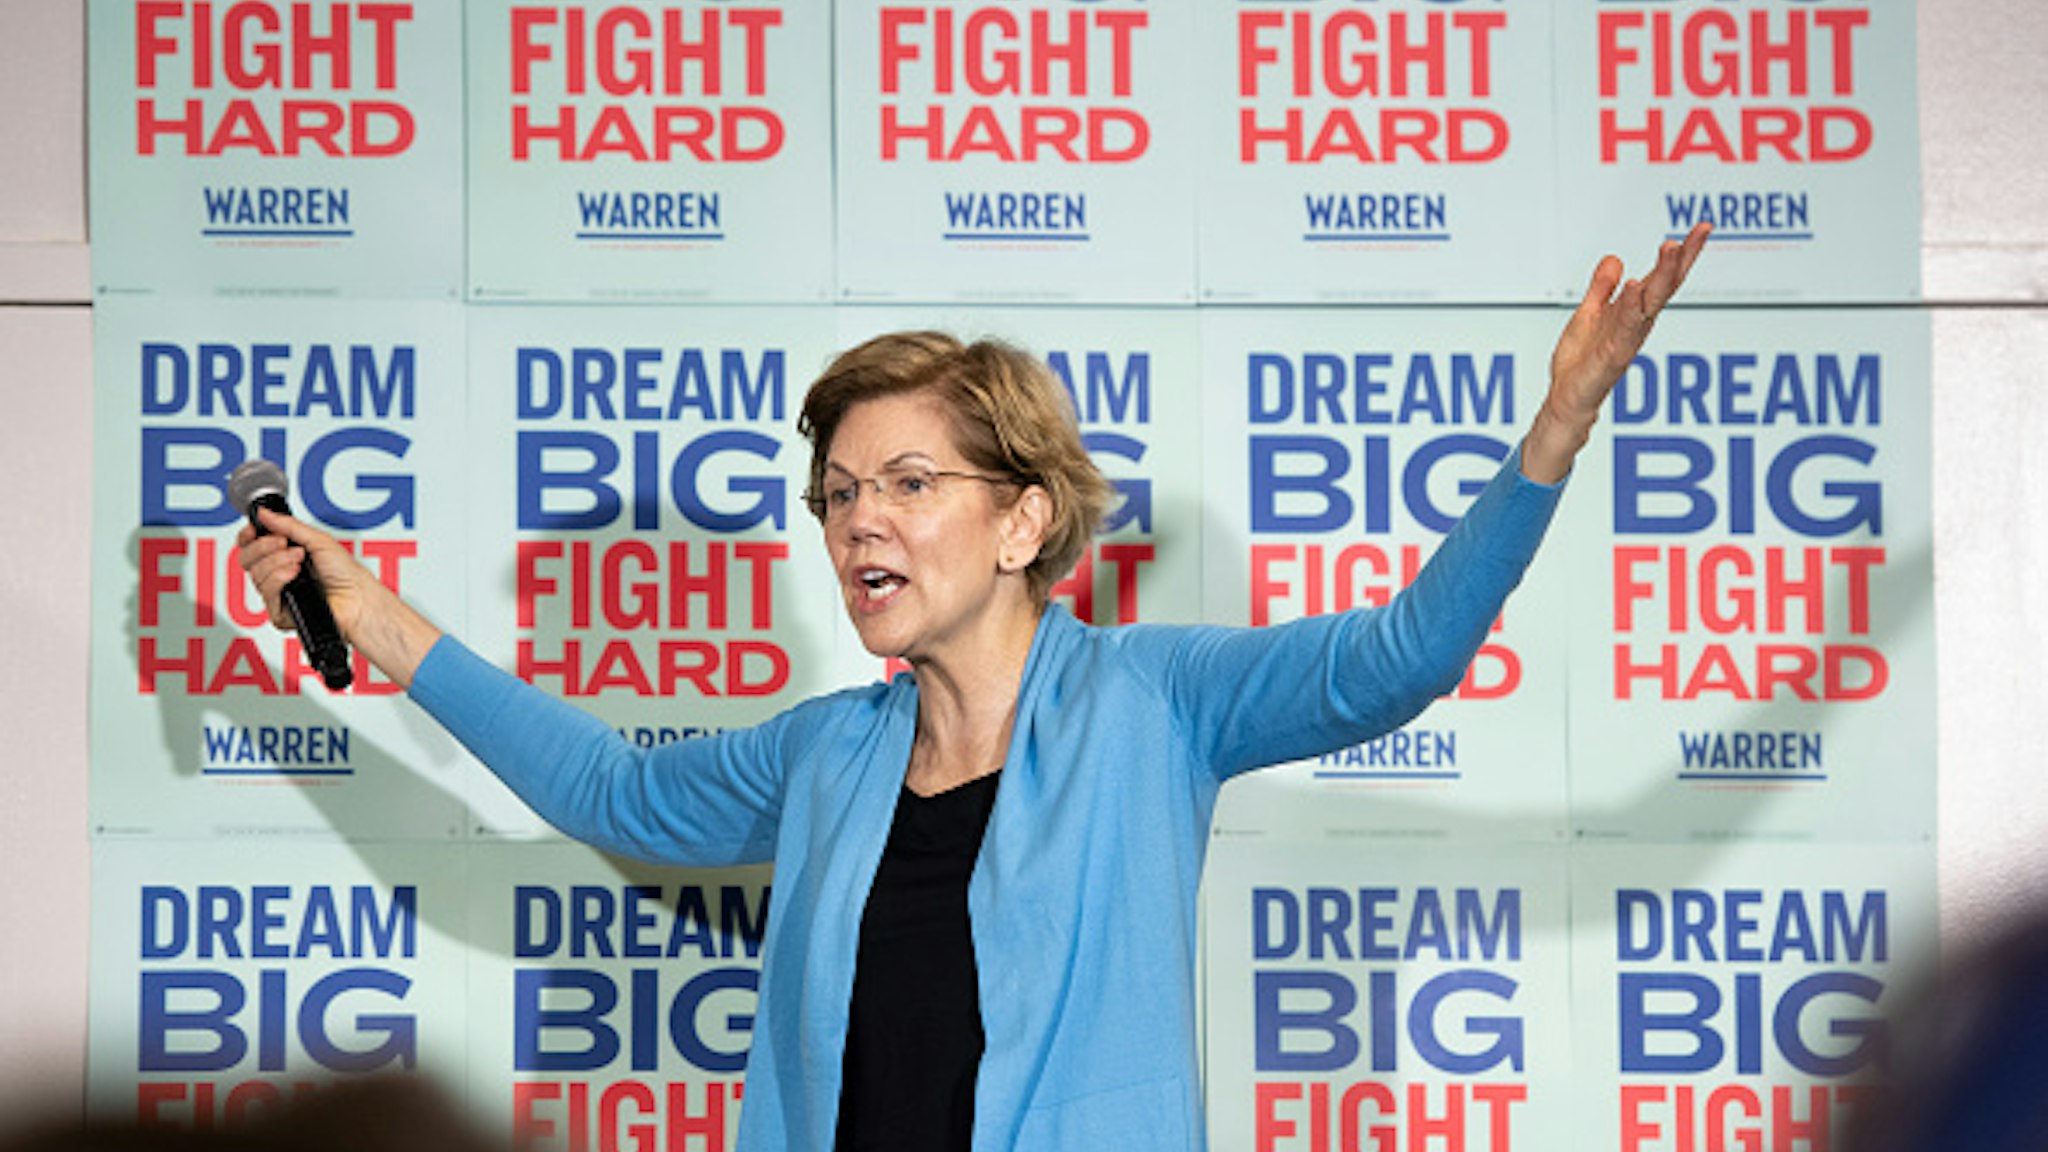 COLUMBIA, SC - FEBRUARY 29: Democratic presidential candidate Sen. Elizabeth Warren (D-MA) addresses a crowd during a canvassing kickoff event February 29, 2020 in Columbia, South Carolina. South Carolinians will participate in the Democratic presidential primary today.